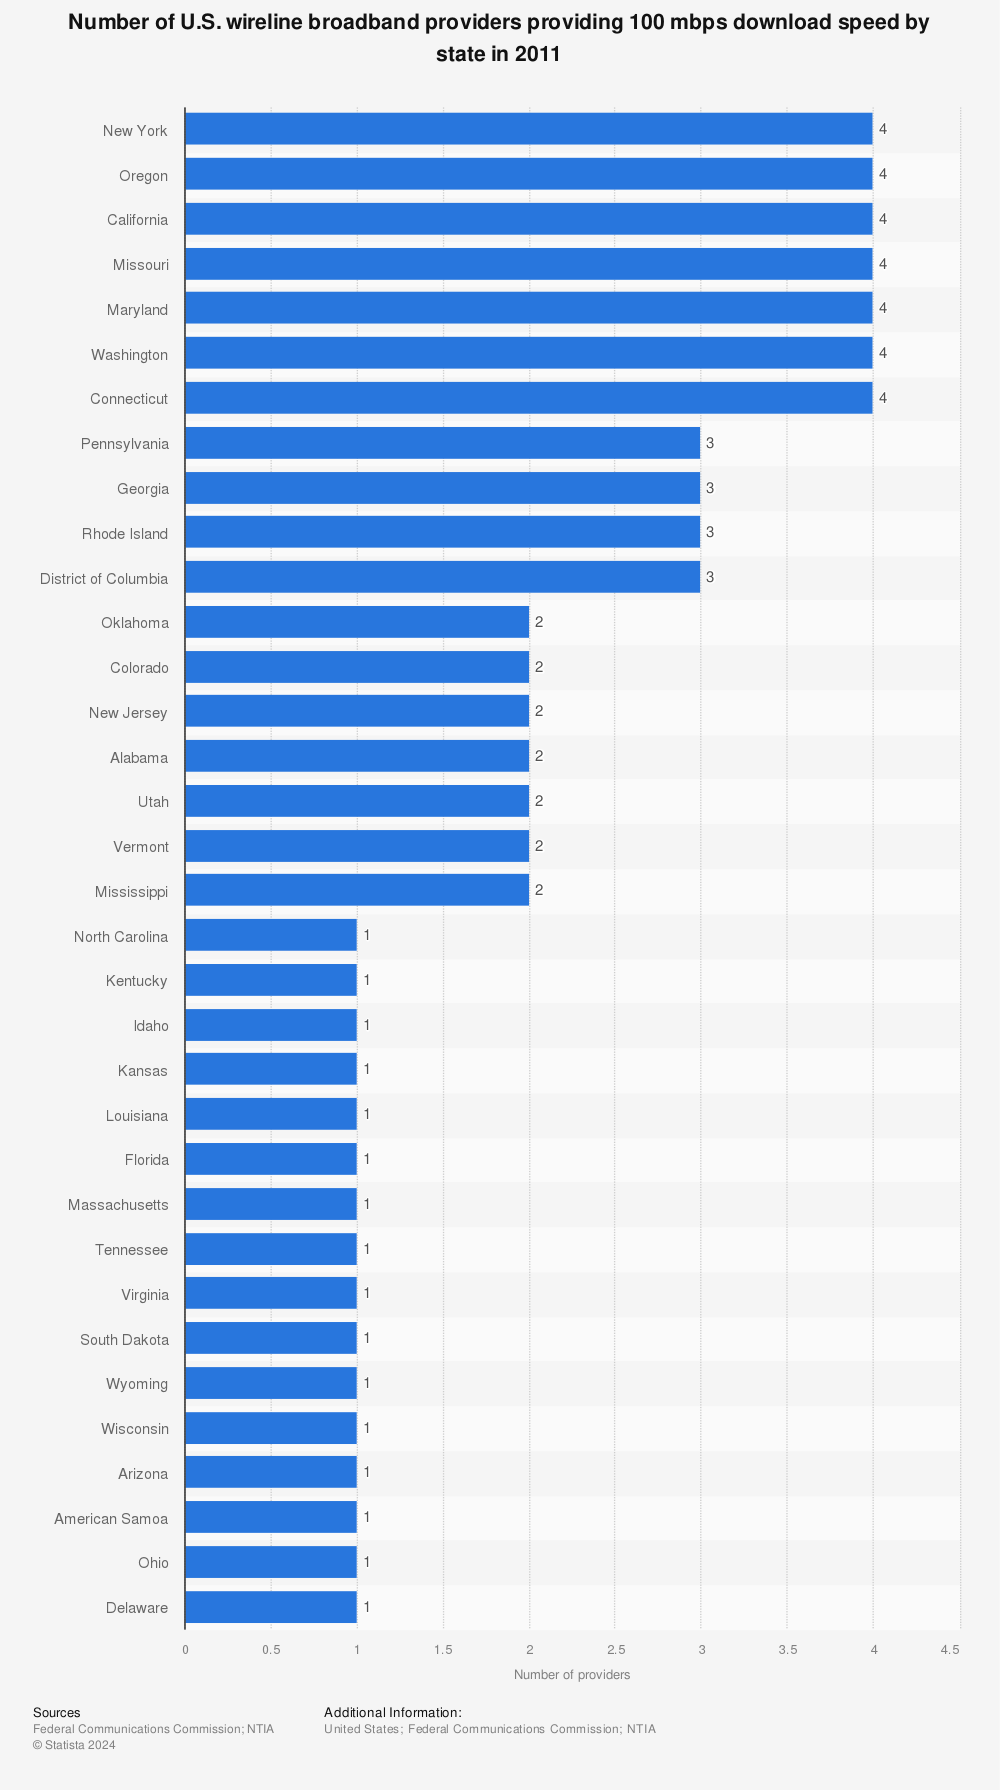 Statistic: Number of U.S. wireline broadband providers providing 100 mbps download speed by state in 2011 | Statista